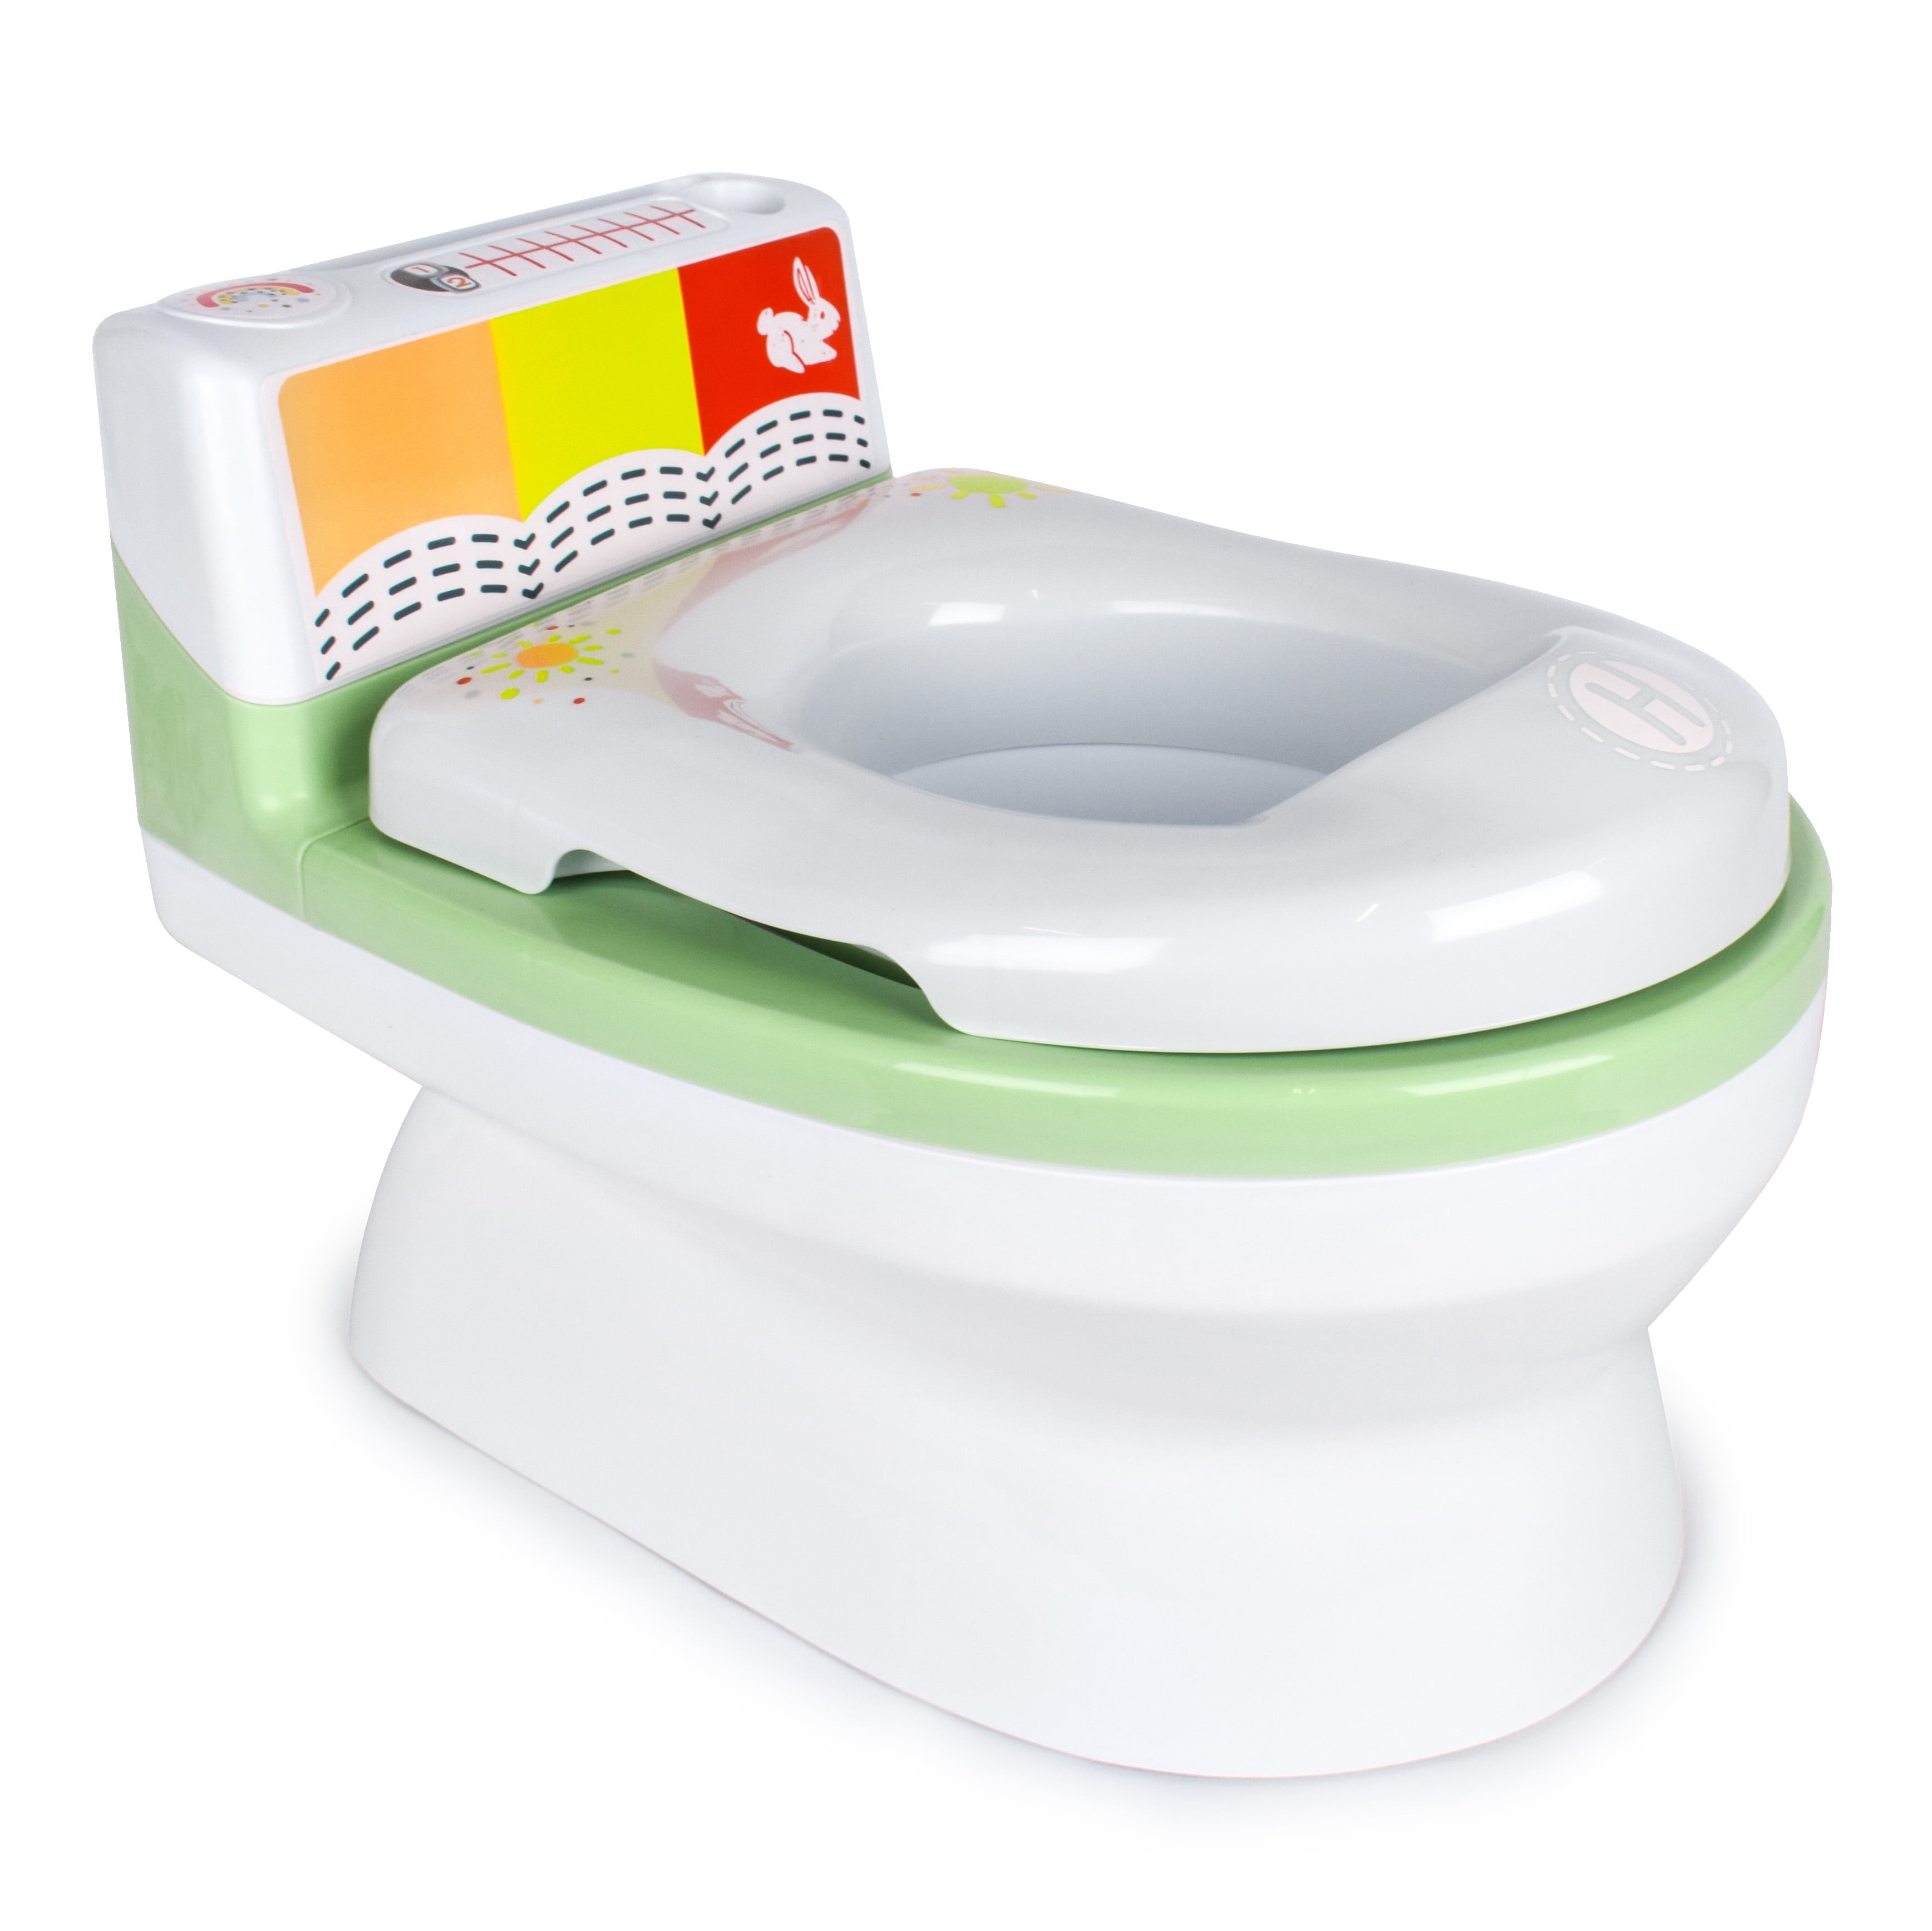 Hopscotch Lane My First Potty - Transition Toilet Trainer for Toddlers 12 Months and Older, Unisex